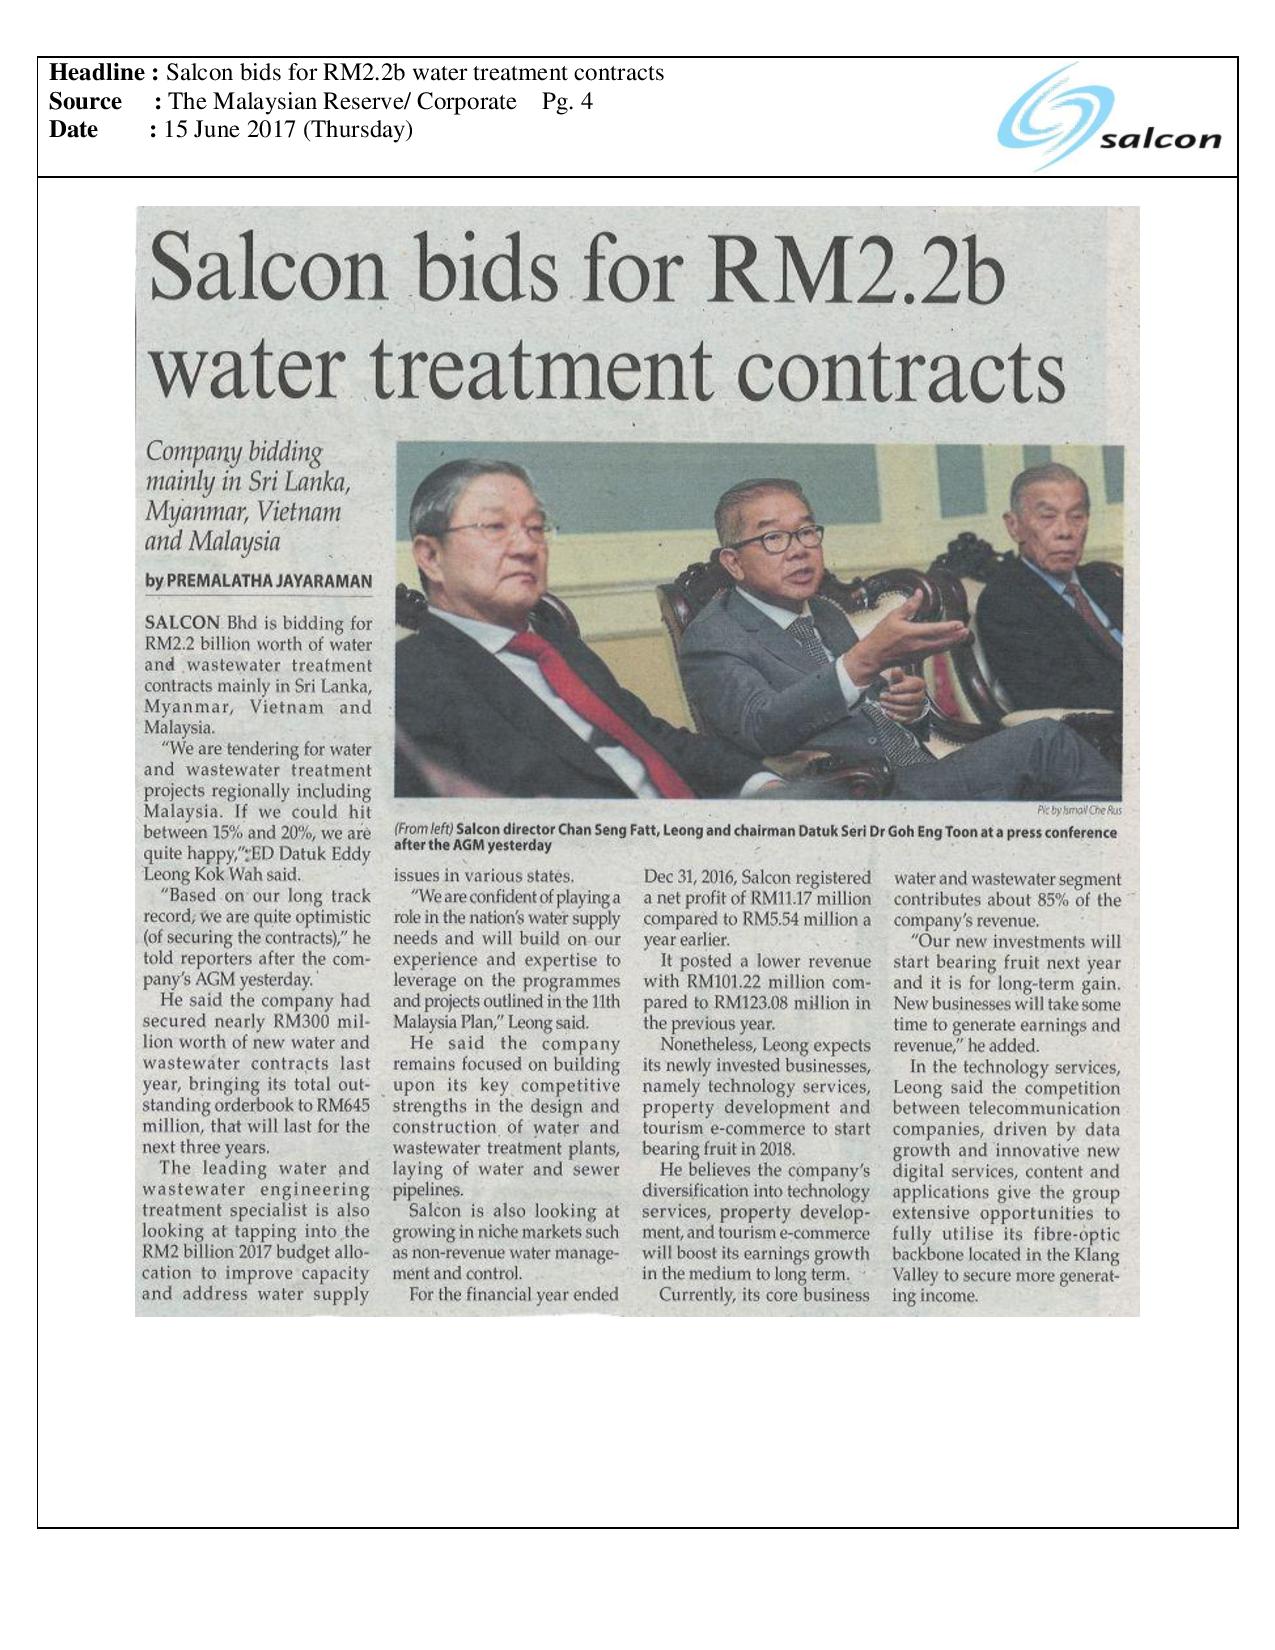 Salcon bids for RM2.2b water treatment contracts